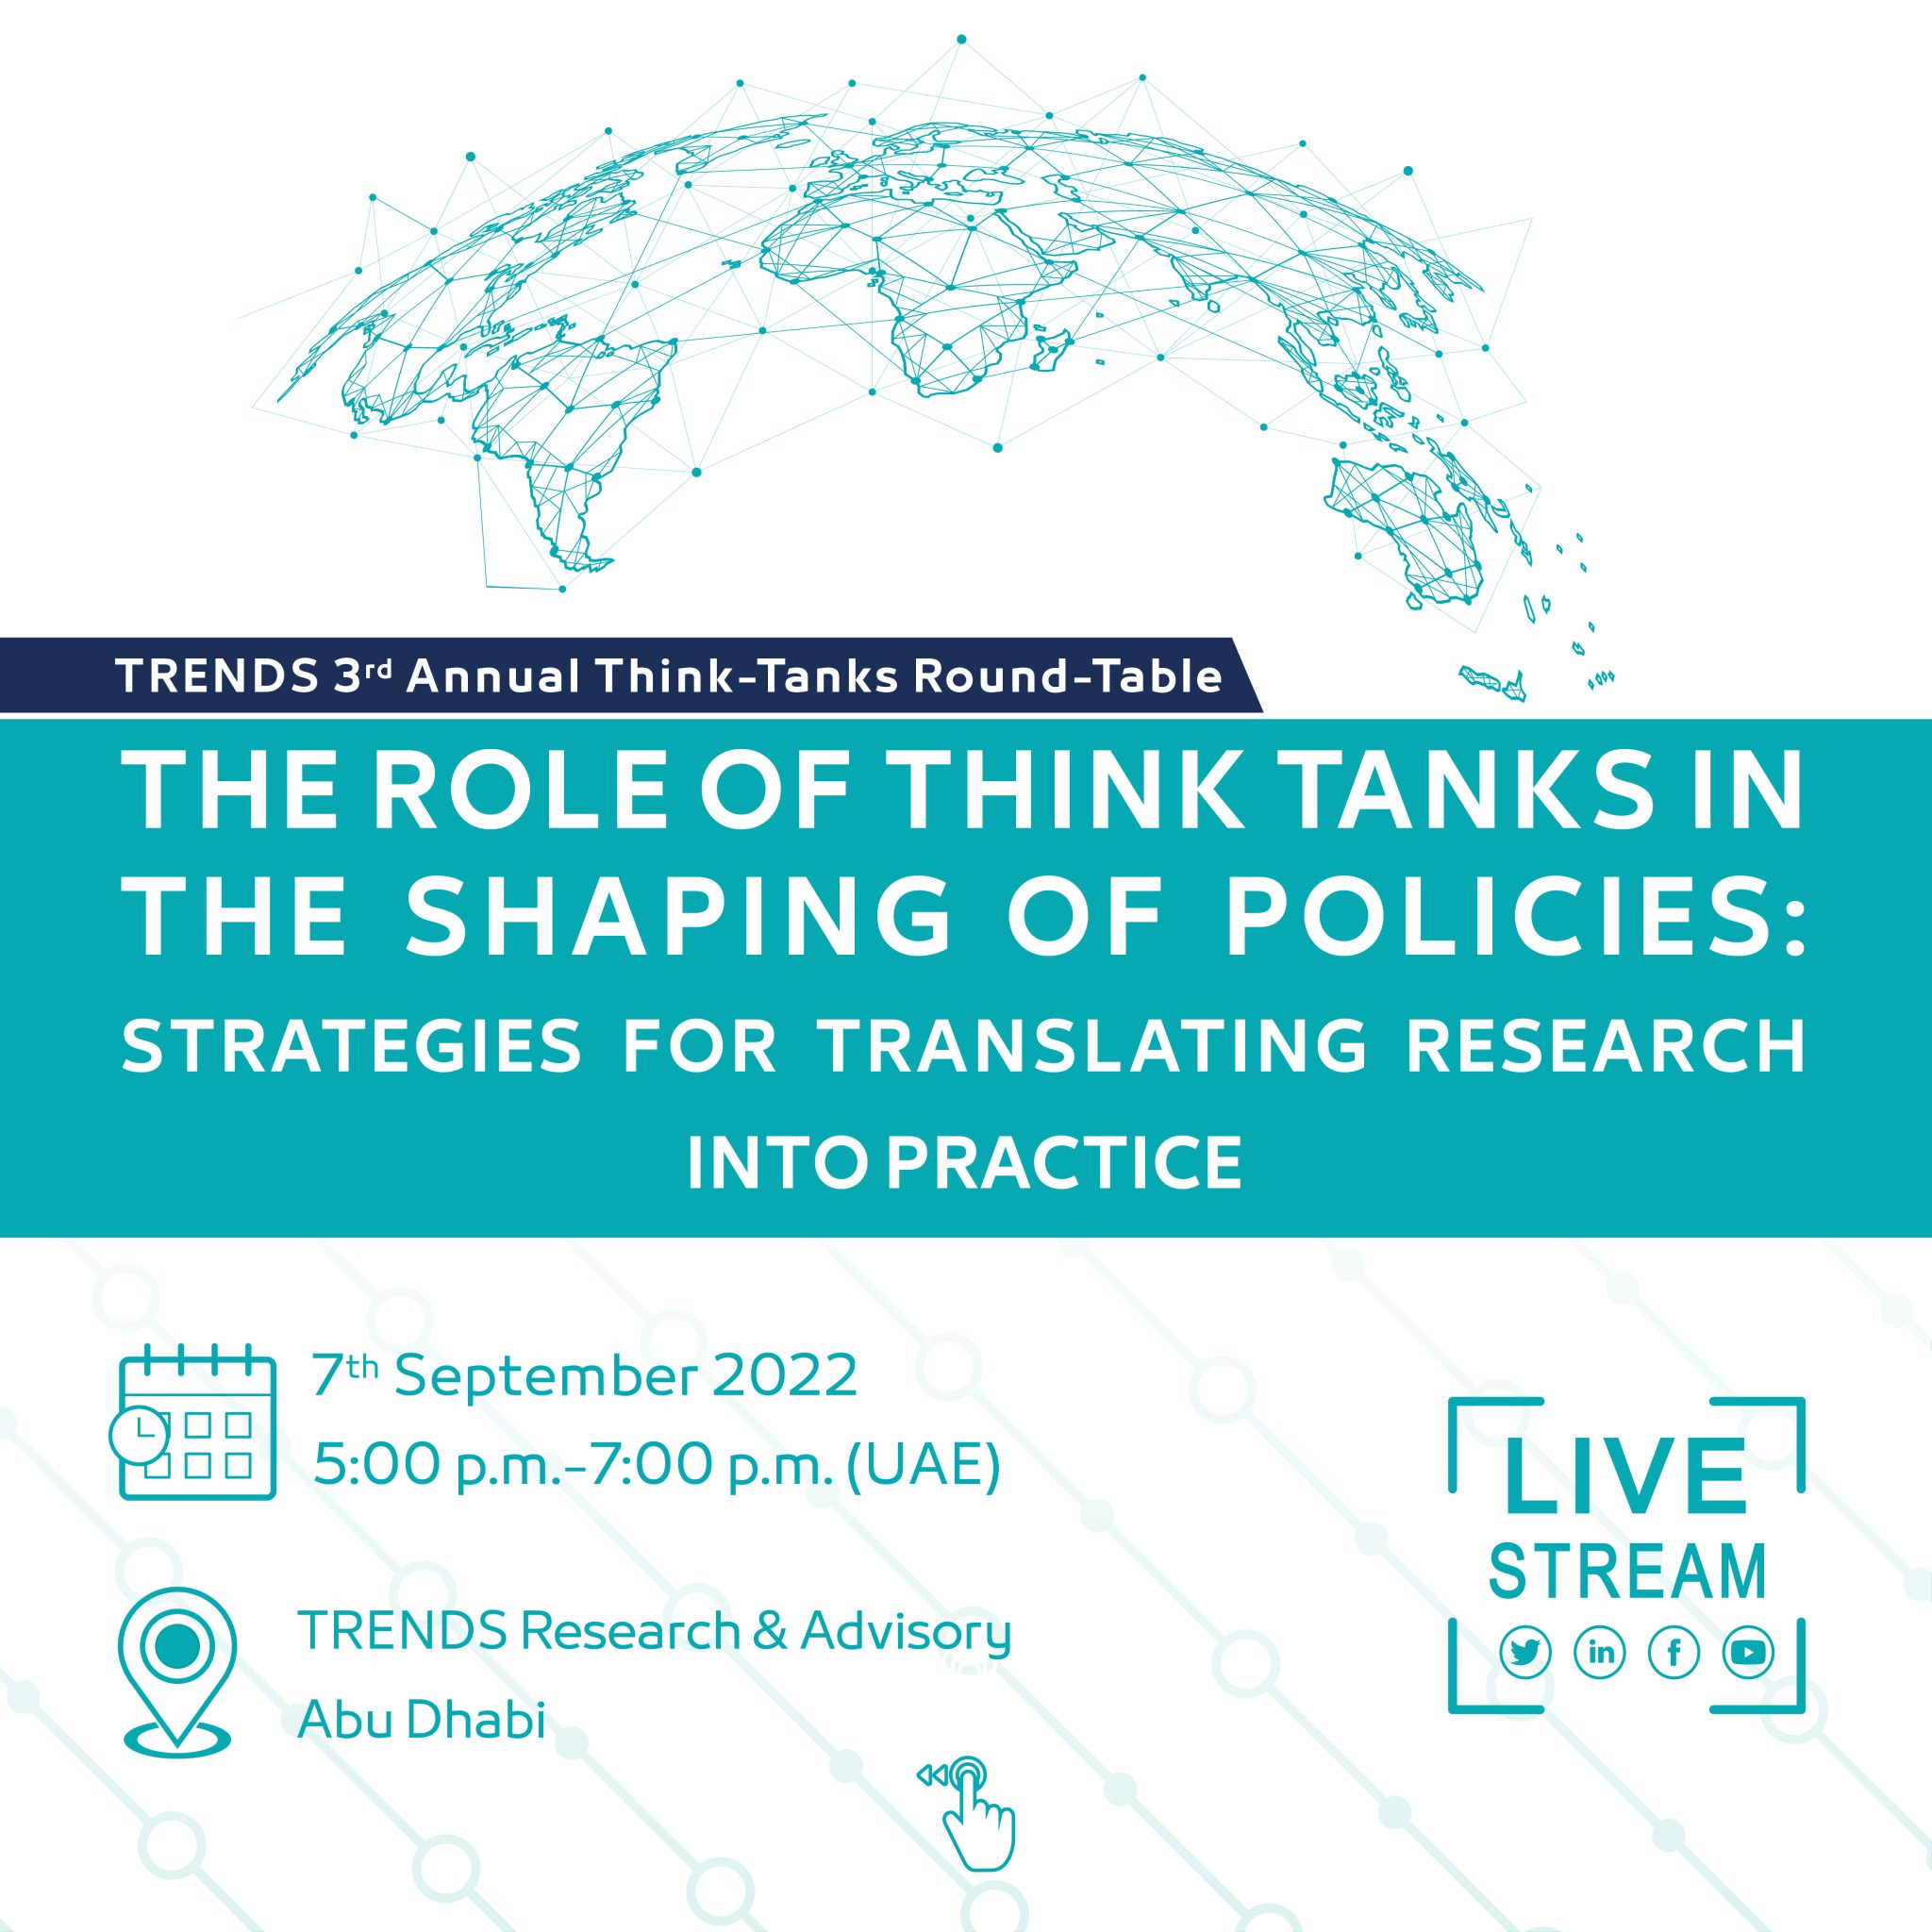 The Role of THINK TANKS in the Shaping of Policies: Strategies for Translating Research into Practice